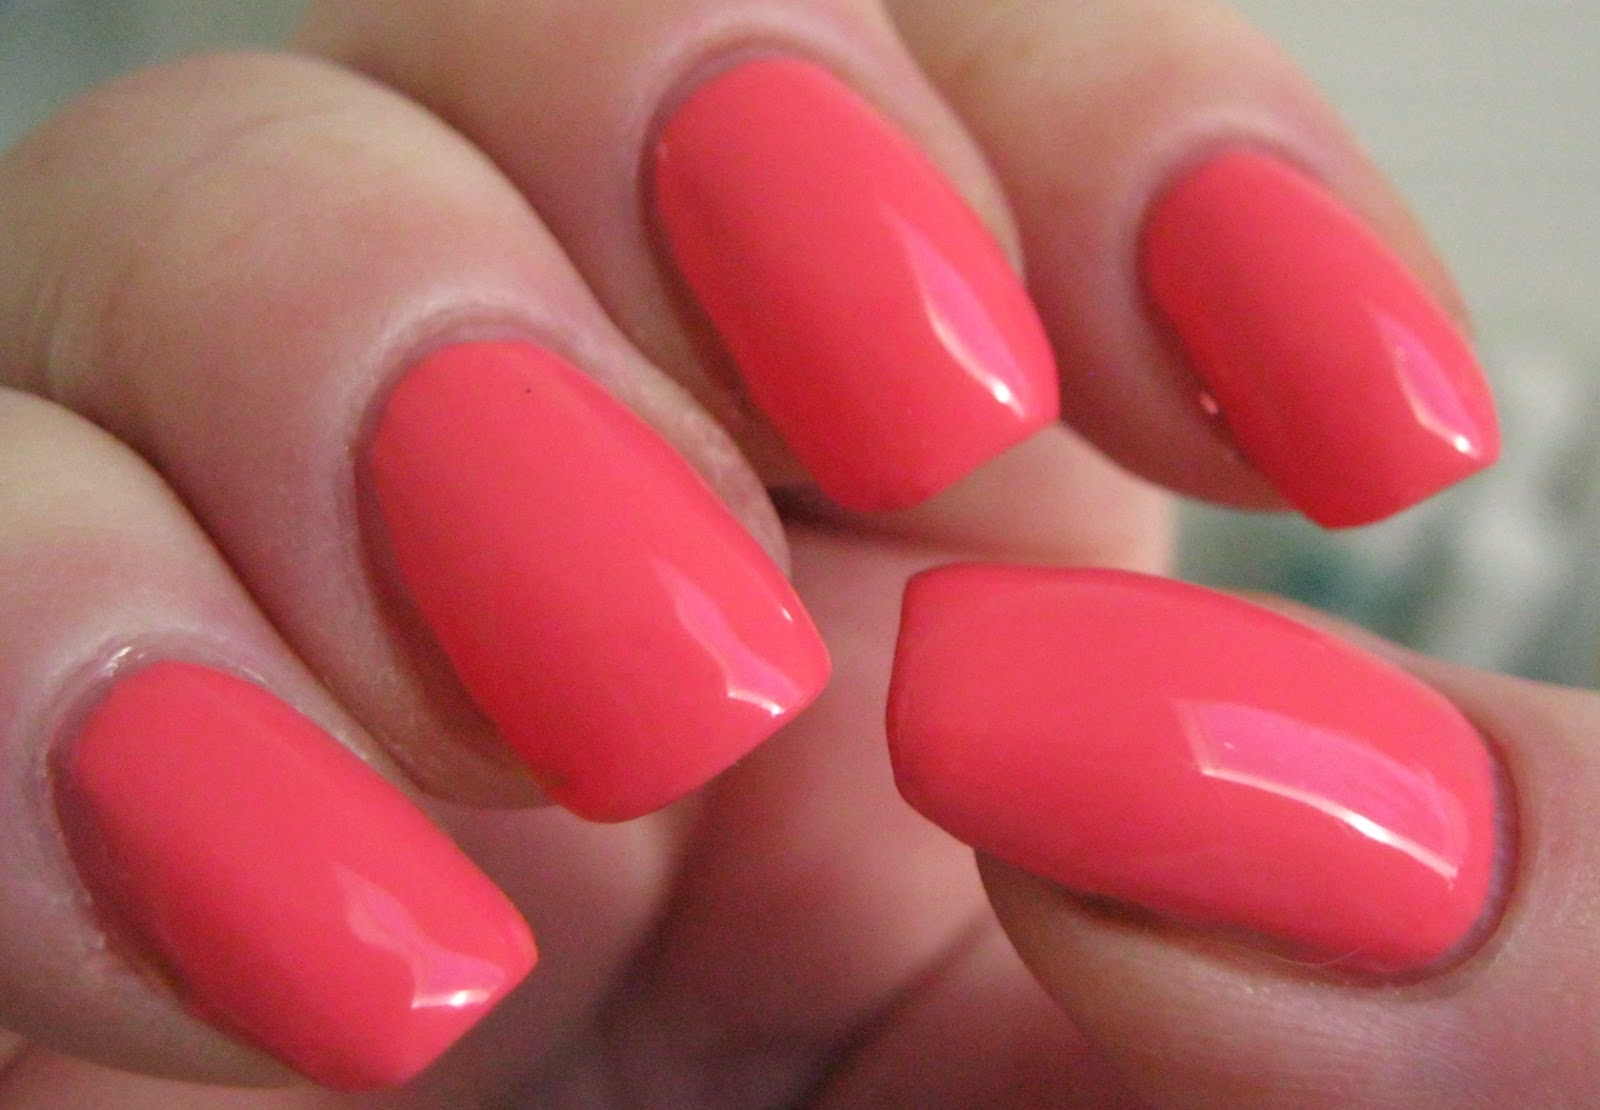 7. Butter London Nail Lacquer in "Trout Pout" - wide 5